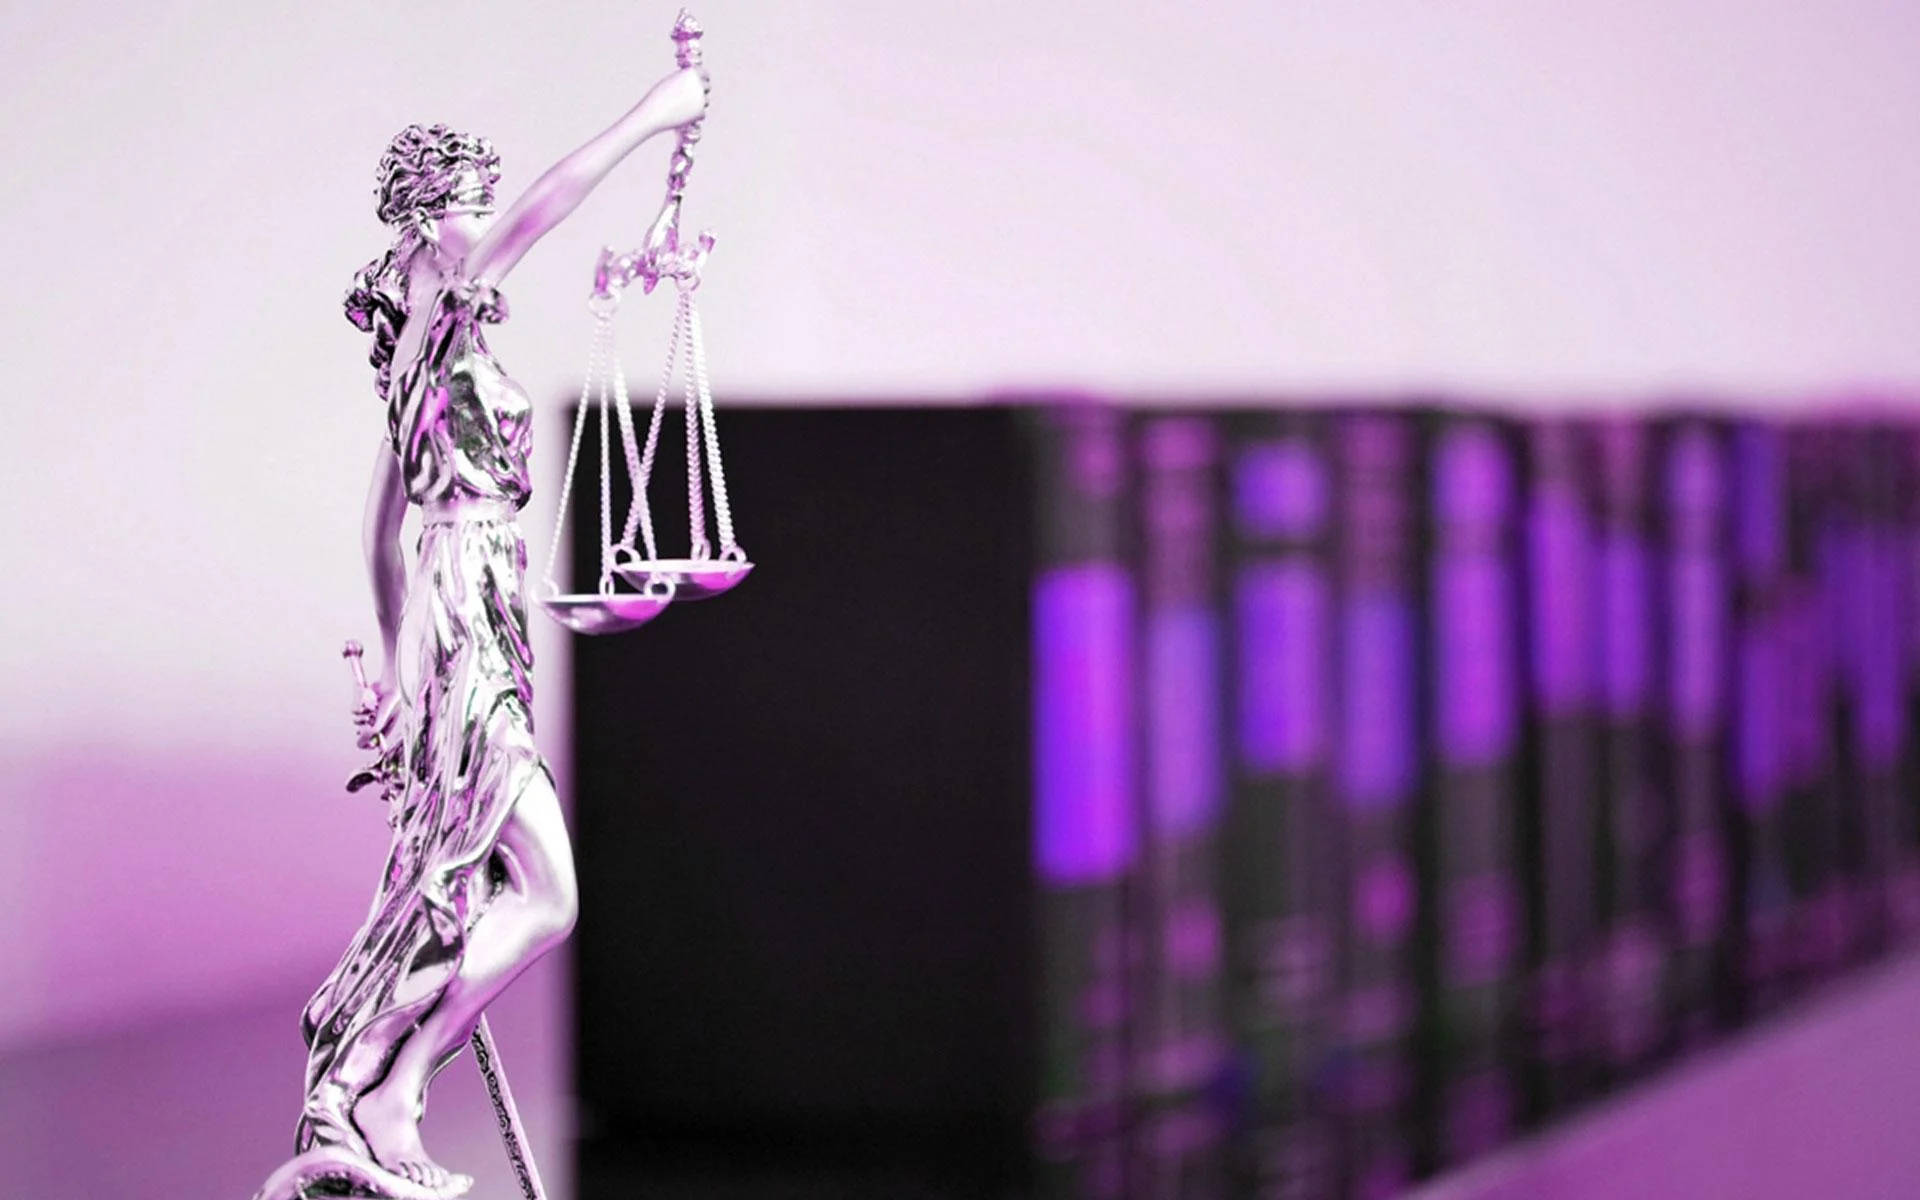 Justice in Action - Female Lawyer with Legal Books and Lady Justice Statue Wallpaper